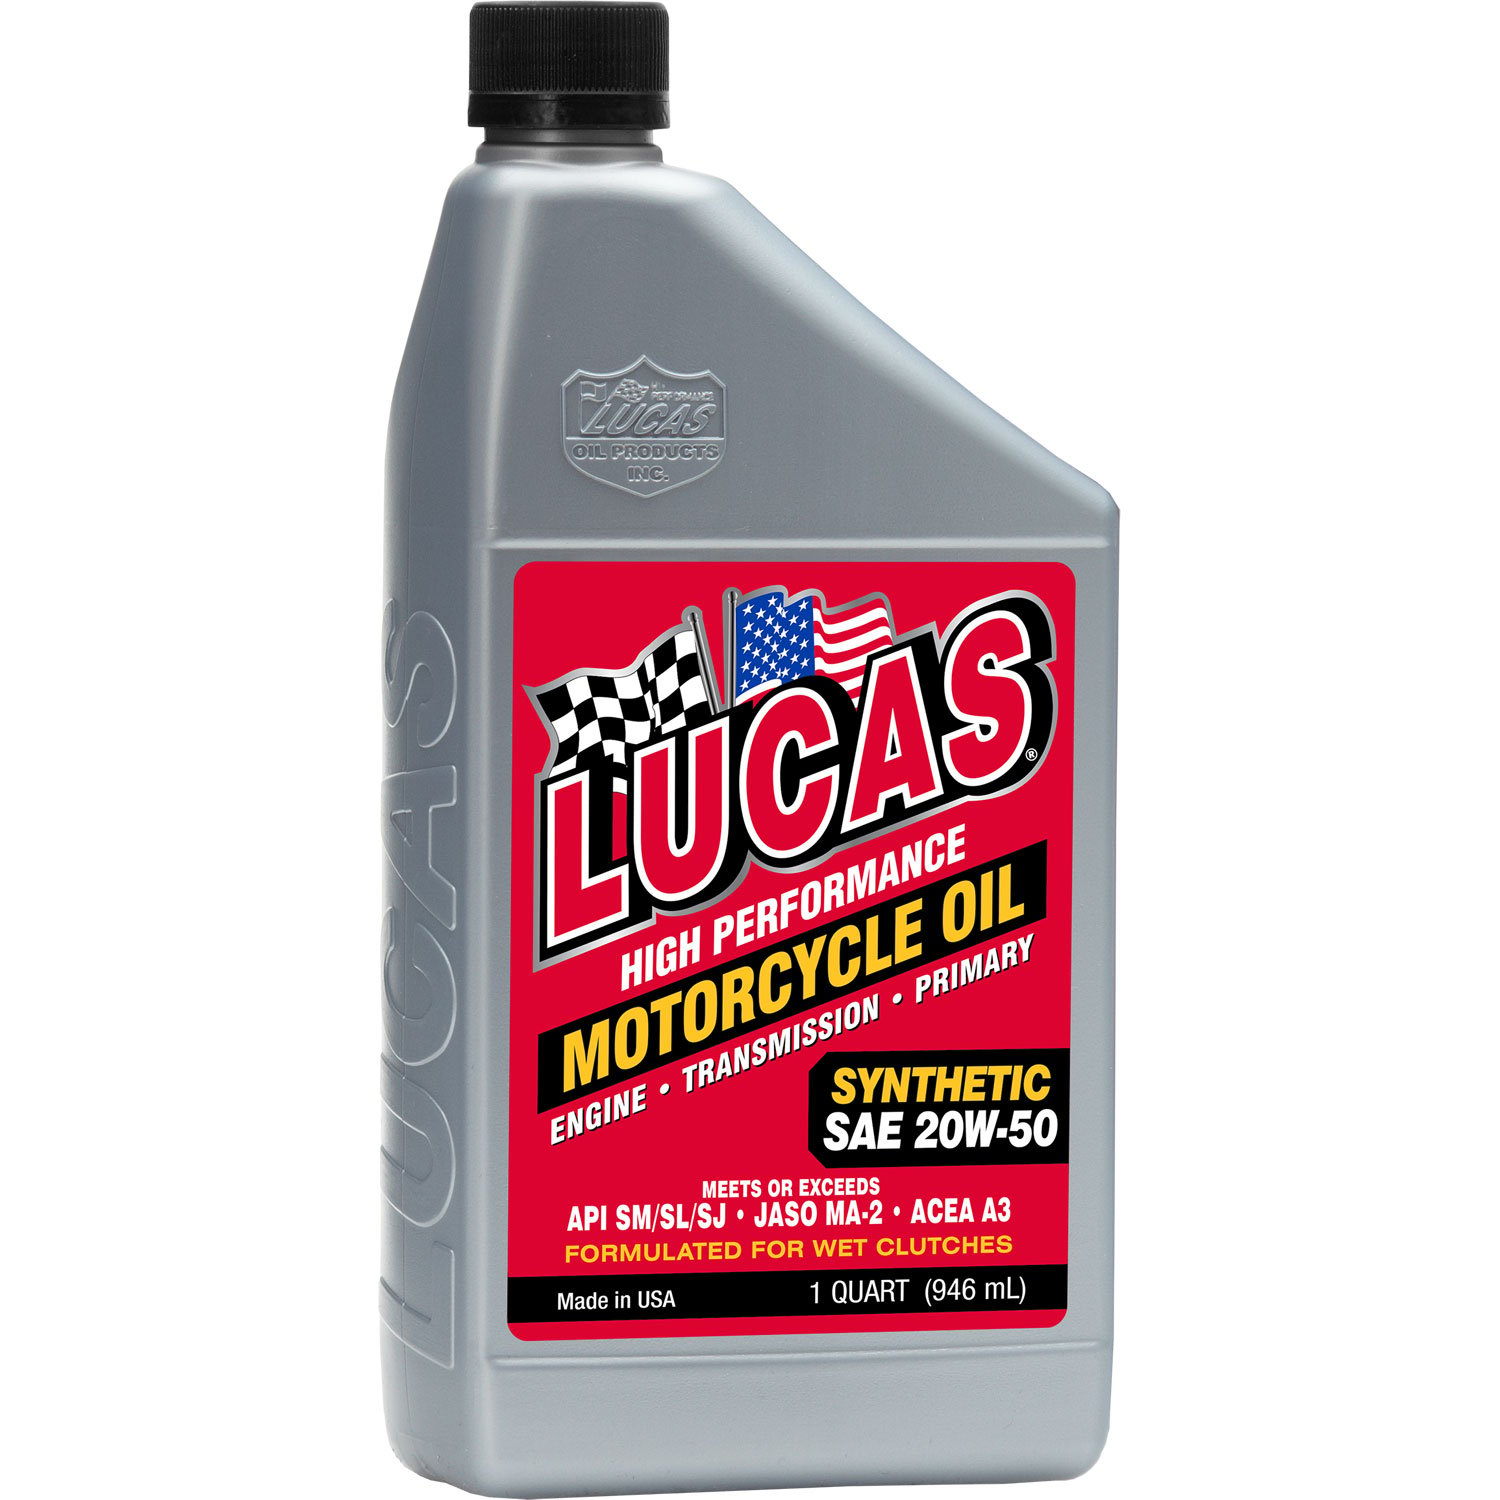 Synthetic SAE 20W-50 Motorcycle Oil 1-Quart